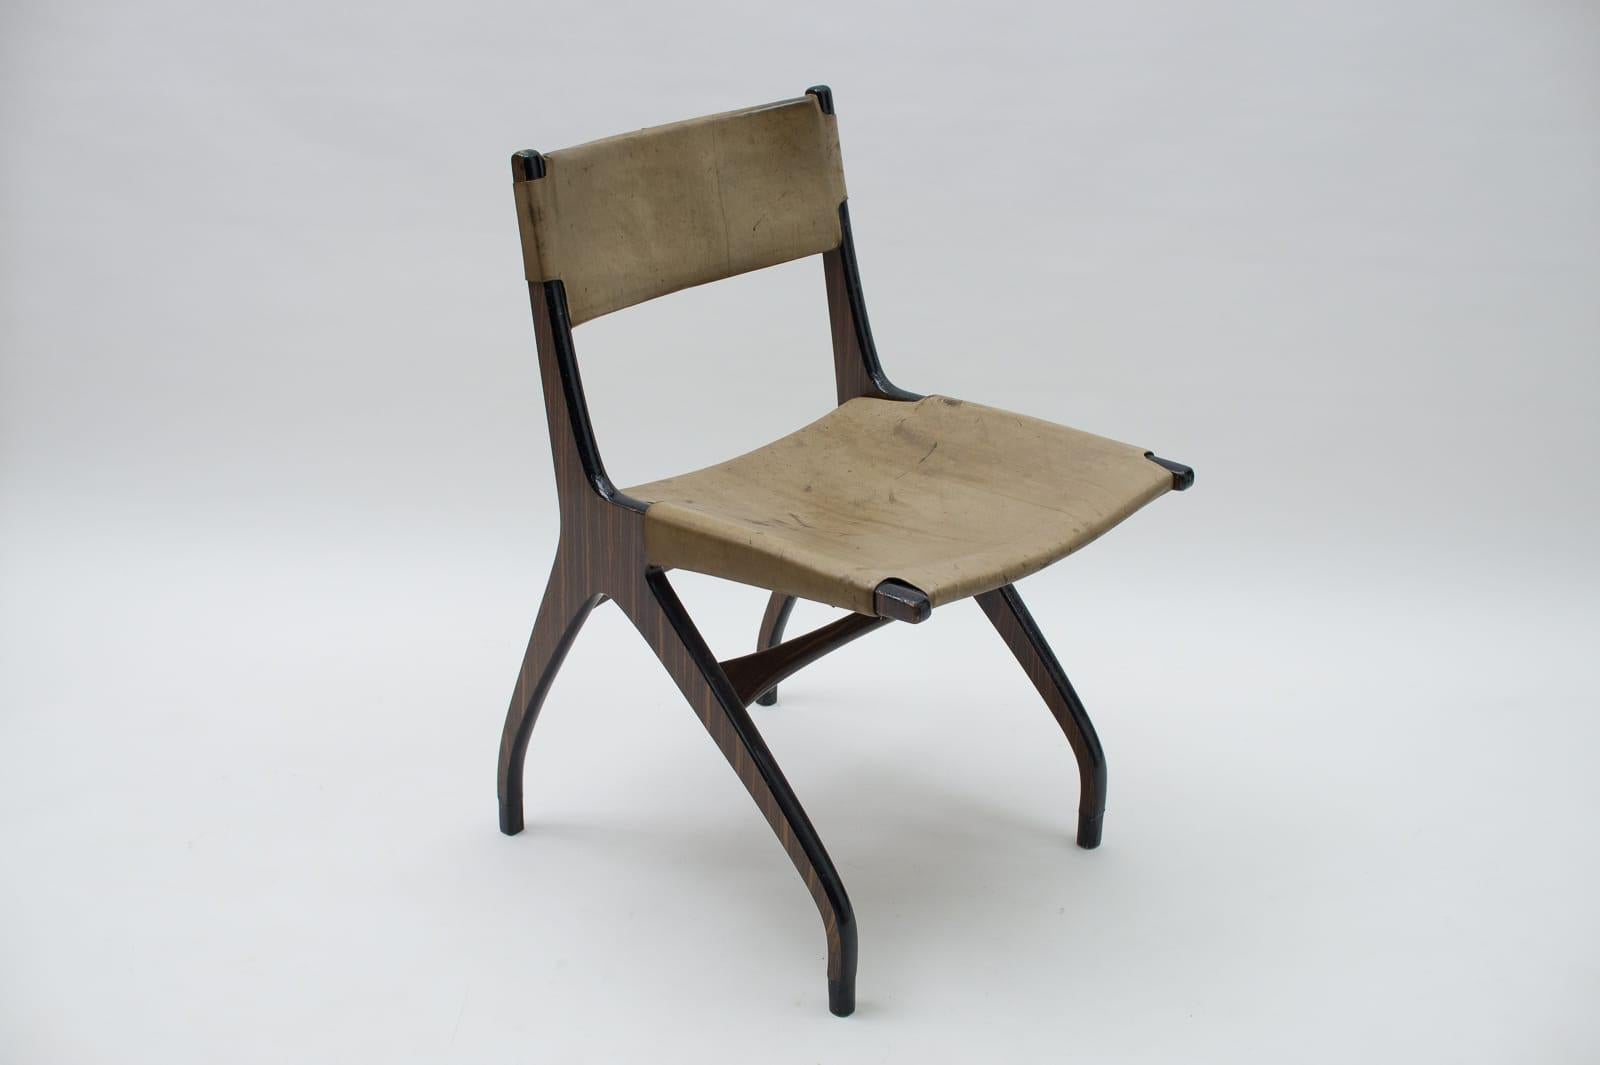 Italian Wooden Chair with Leather Upholstery, 1960s For Sale 4